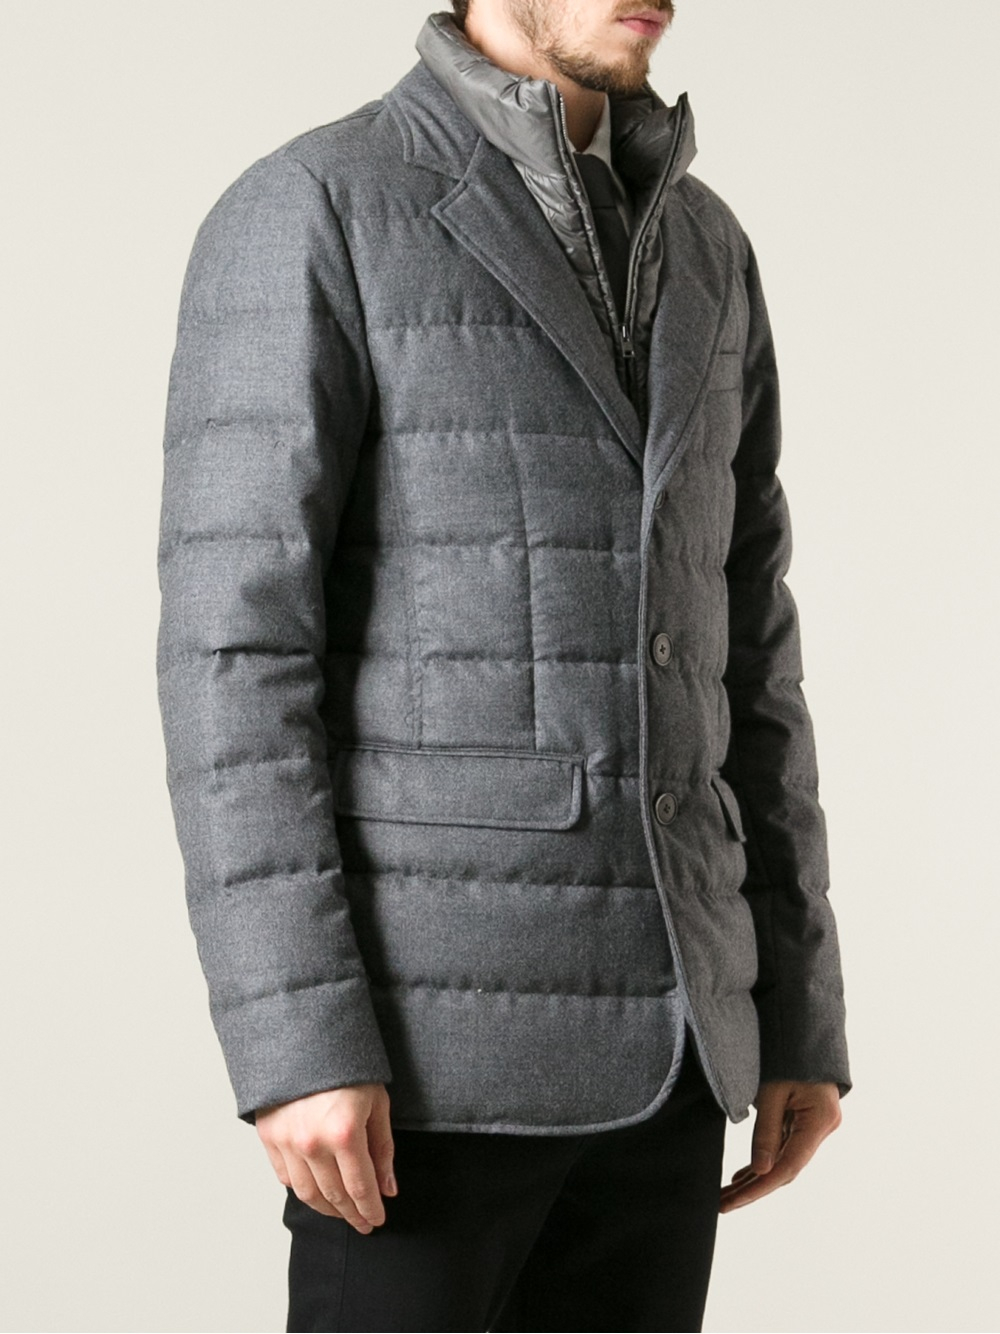 Lyst - Herno Padded Jacket in Gray for Men